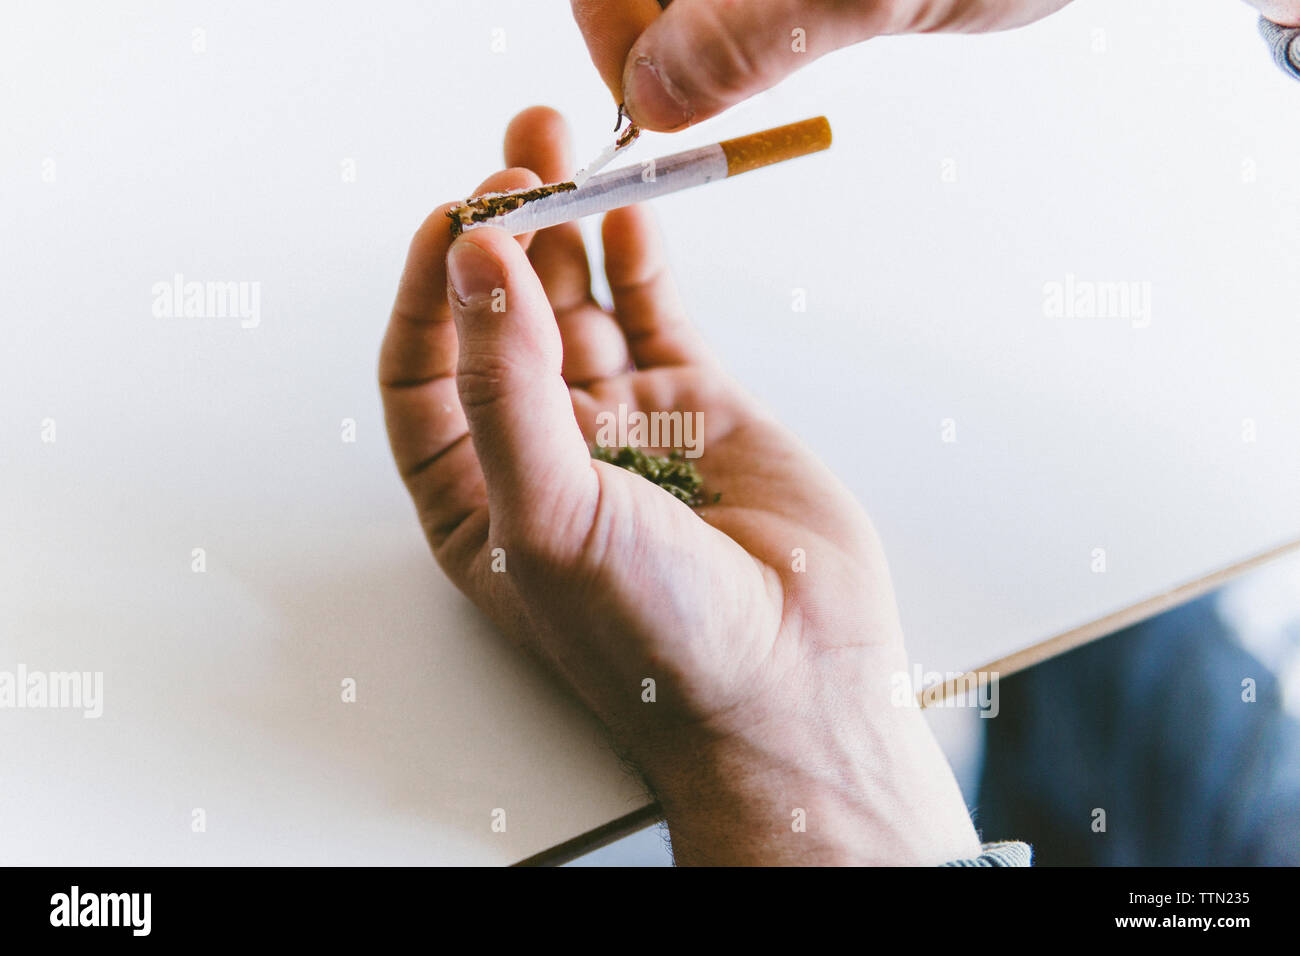 Cropped hand of man holding marijuana joints while tearing cigarette at table Stock Photo